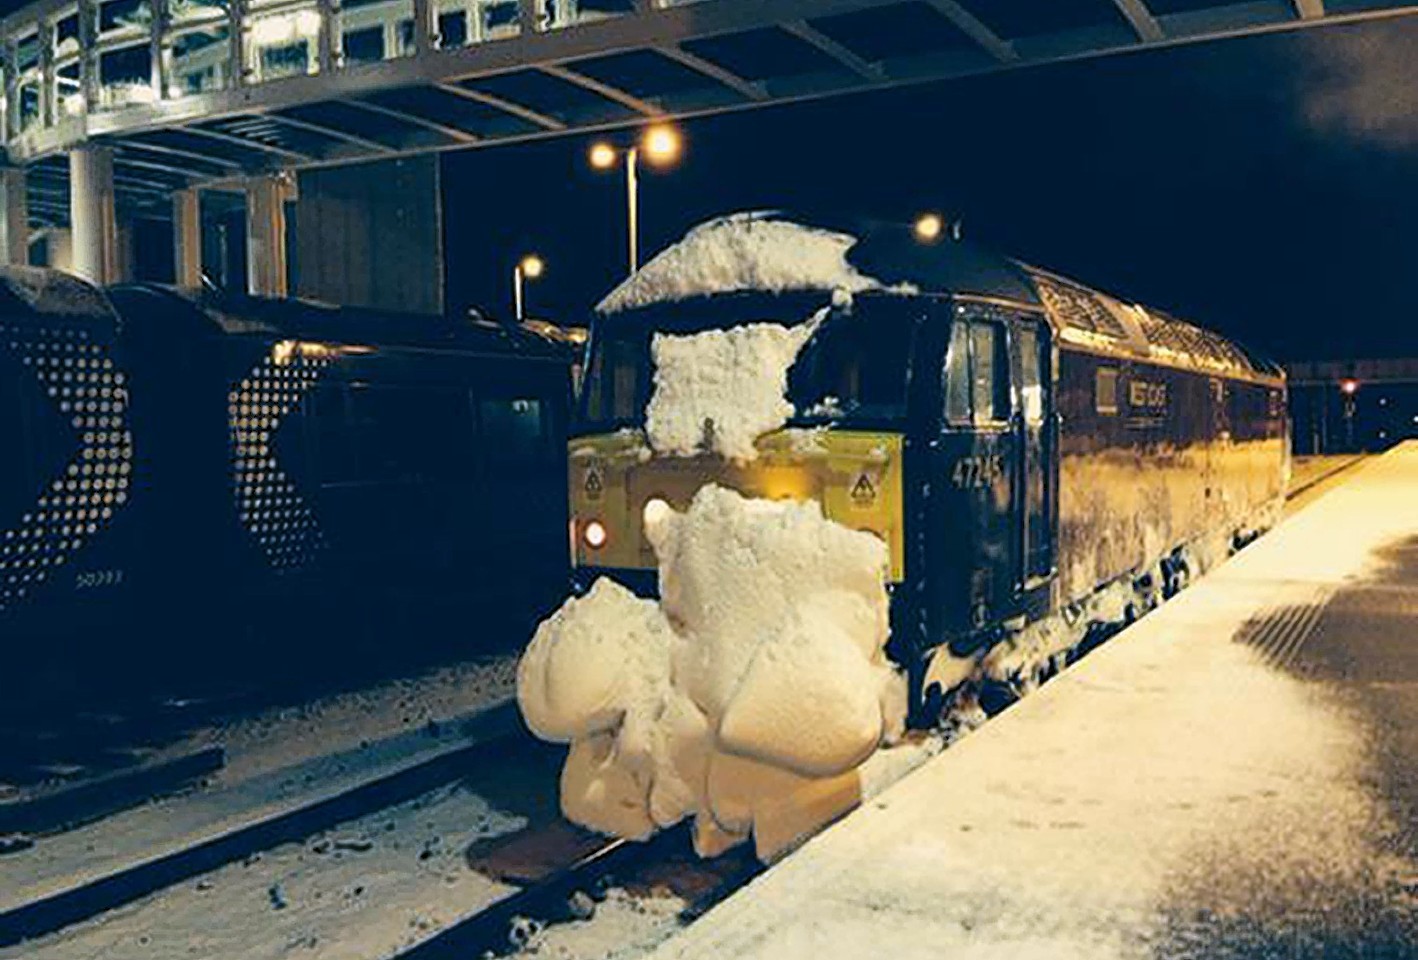 The train snow plough between Perth and Aviemore